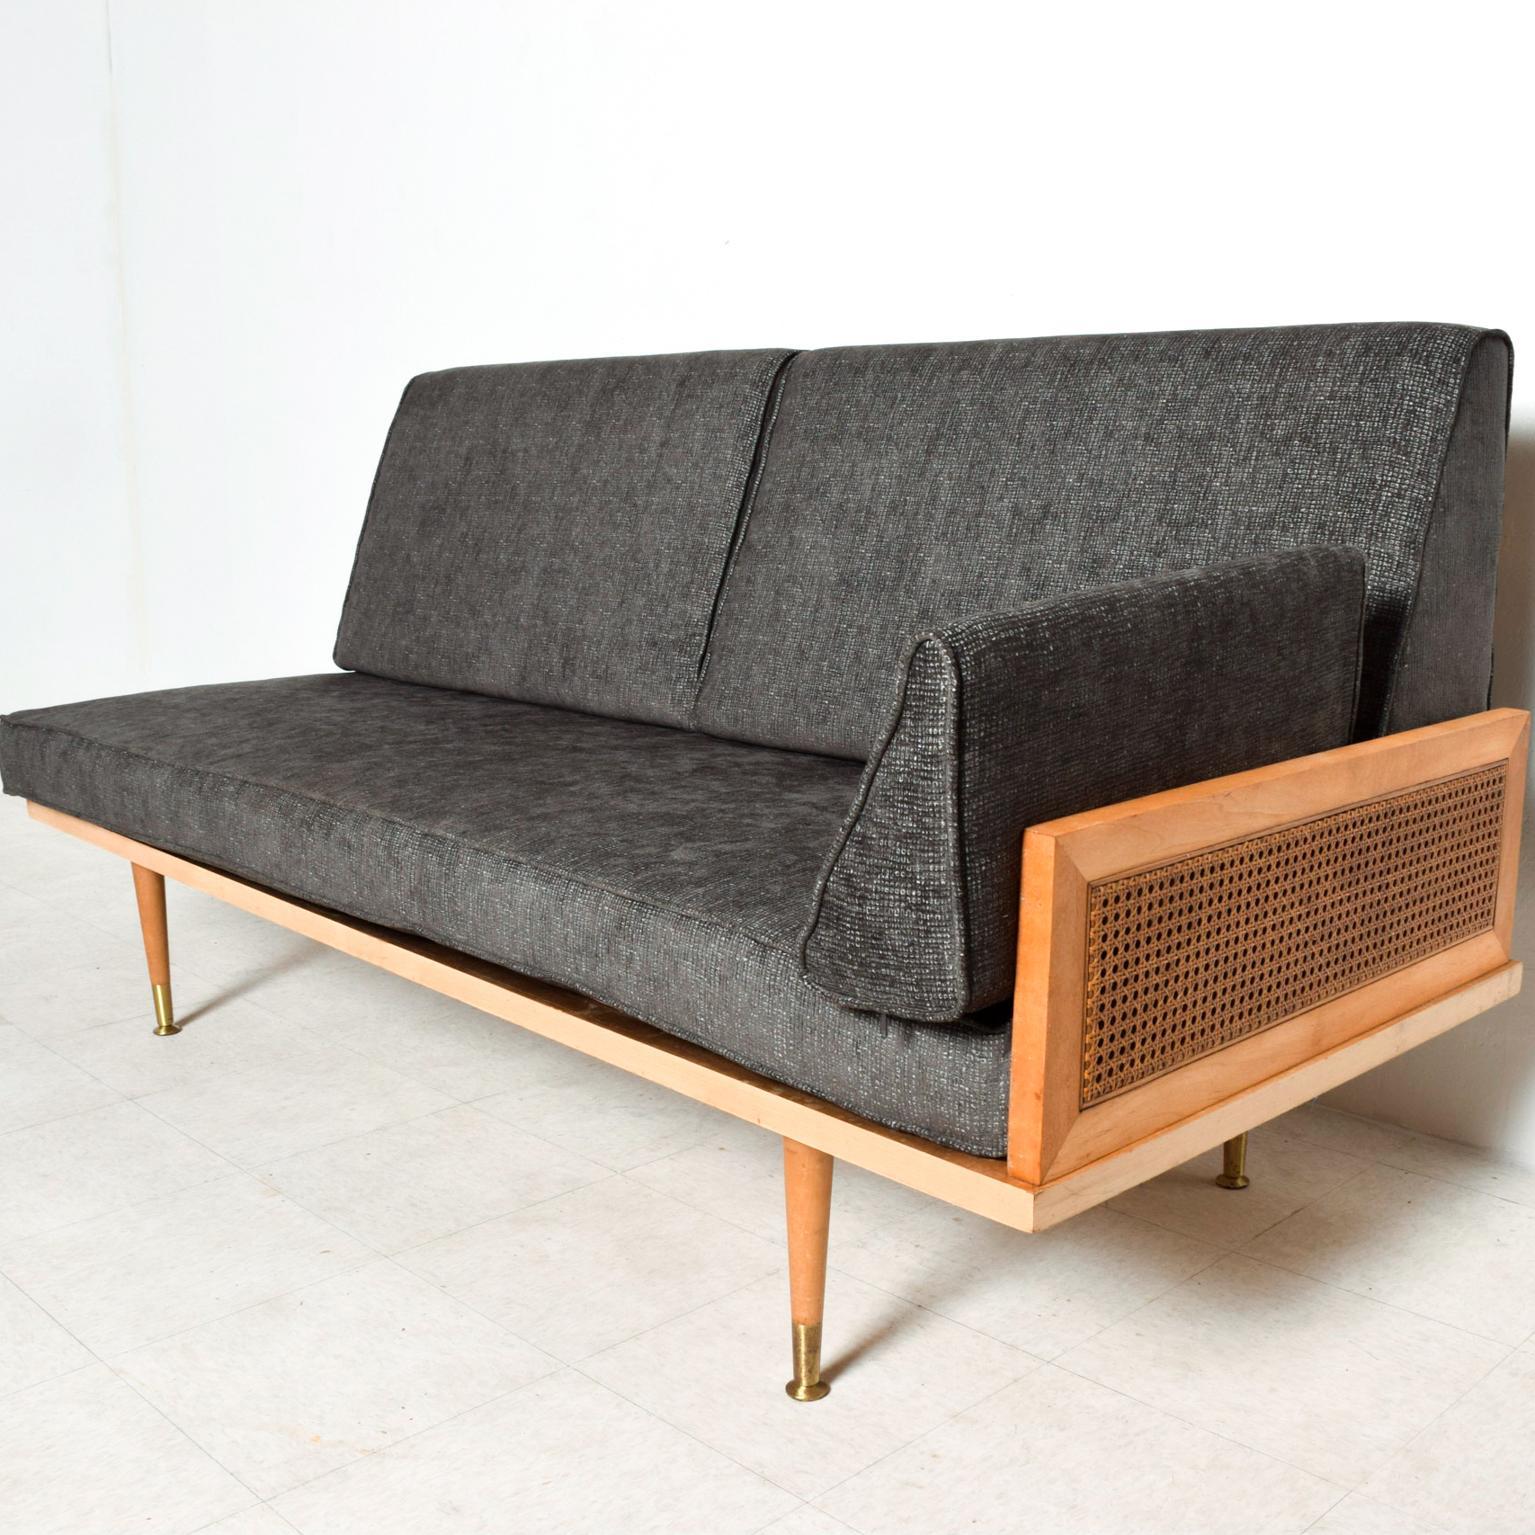 We are pleased to offer for your consideration a beautifully modern set of daybeds or matching sofas. Solid maple wood with tubular steel hardware in black paint. Armrest decorated with wicker cane. Mounted on solid maple wood peg legs with brass